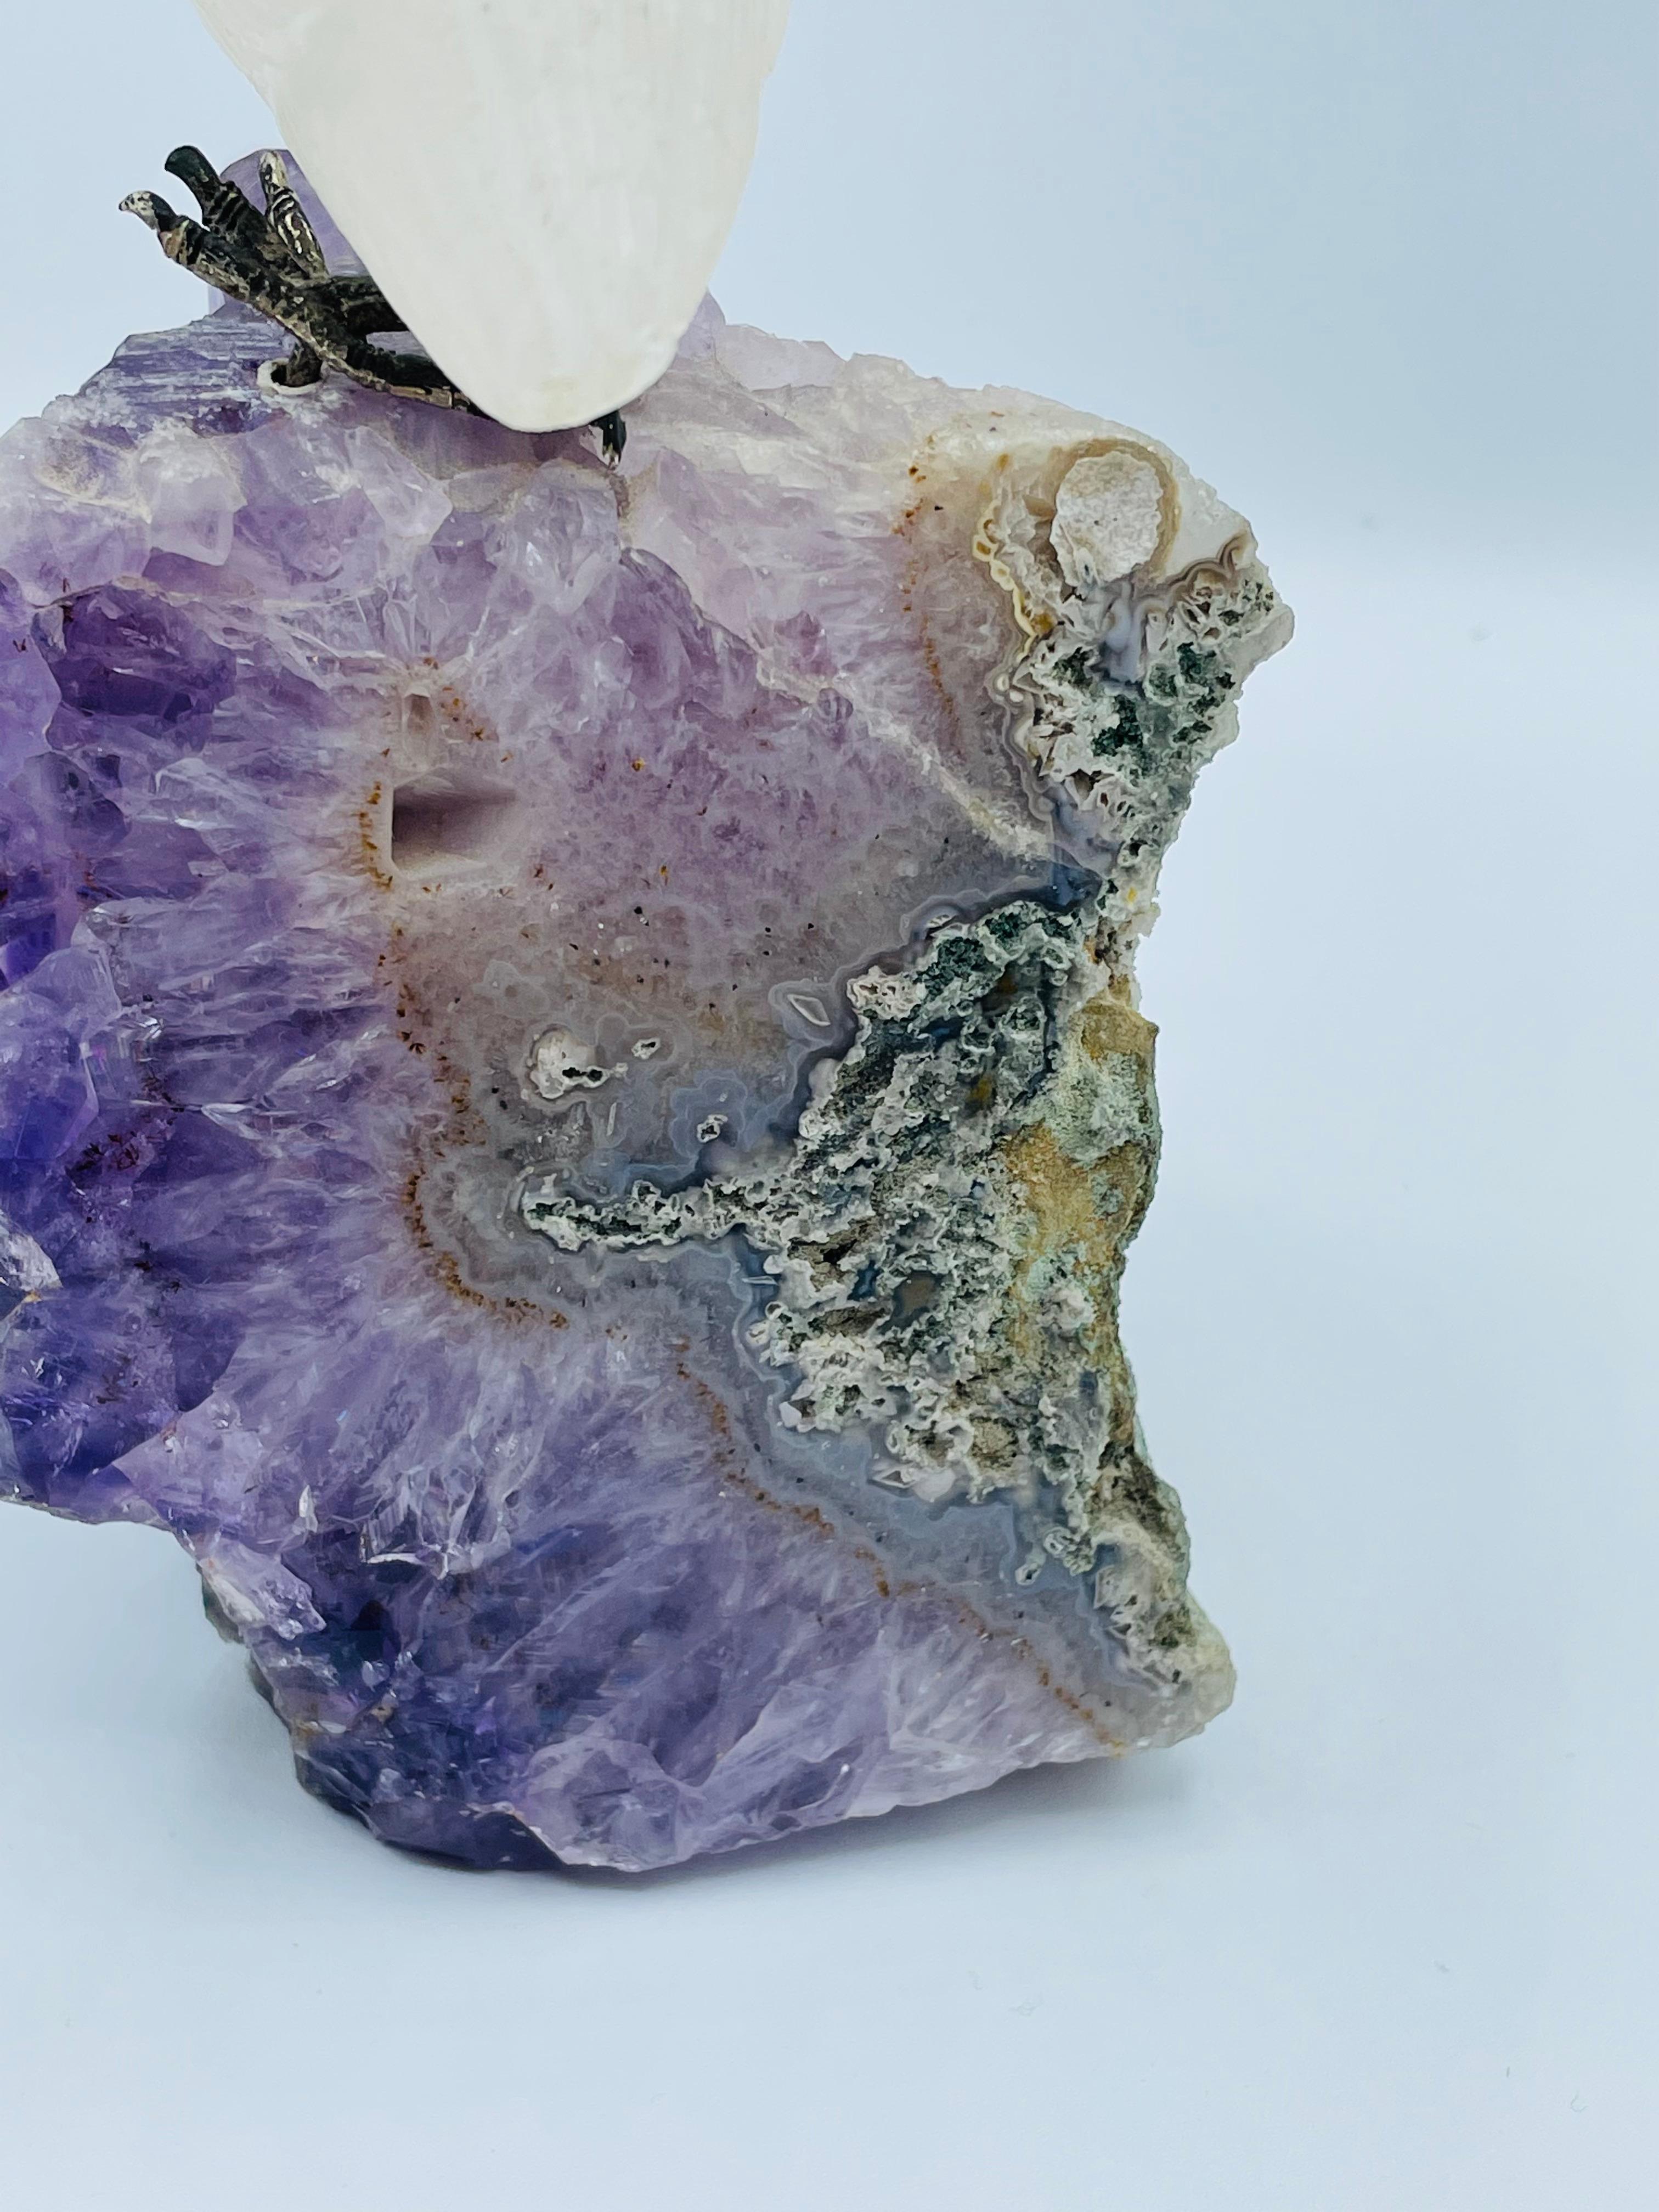 Rock Crystal and Amethyst Geode Sculpture of a Carved Parrot Bird 1